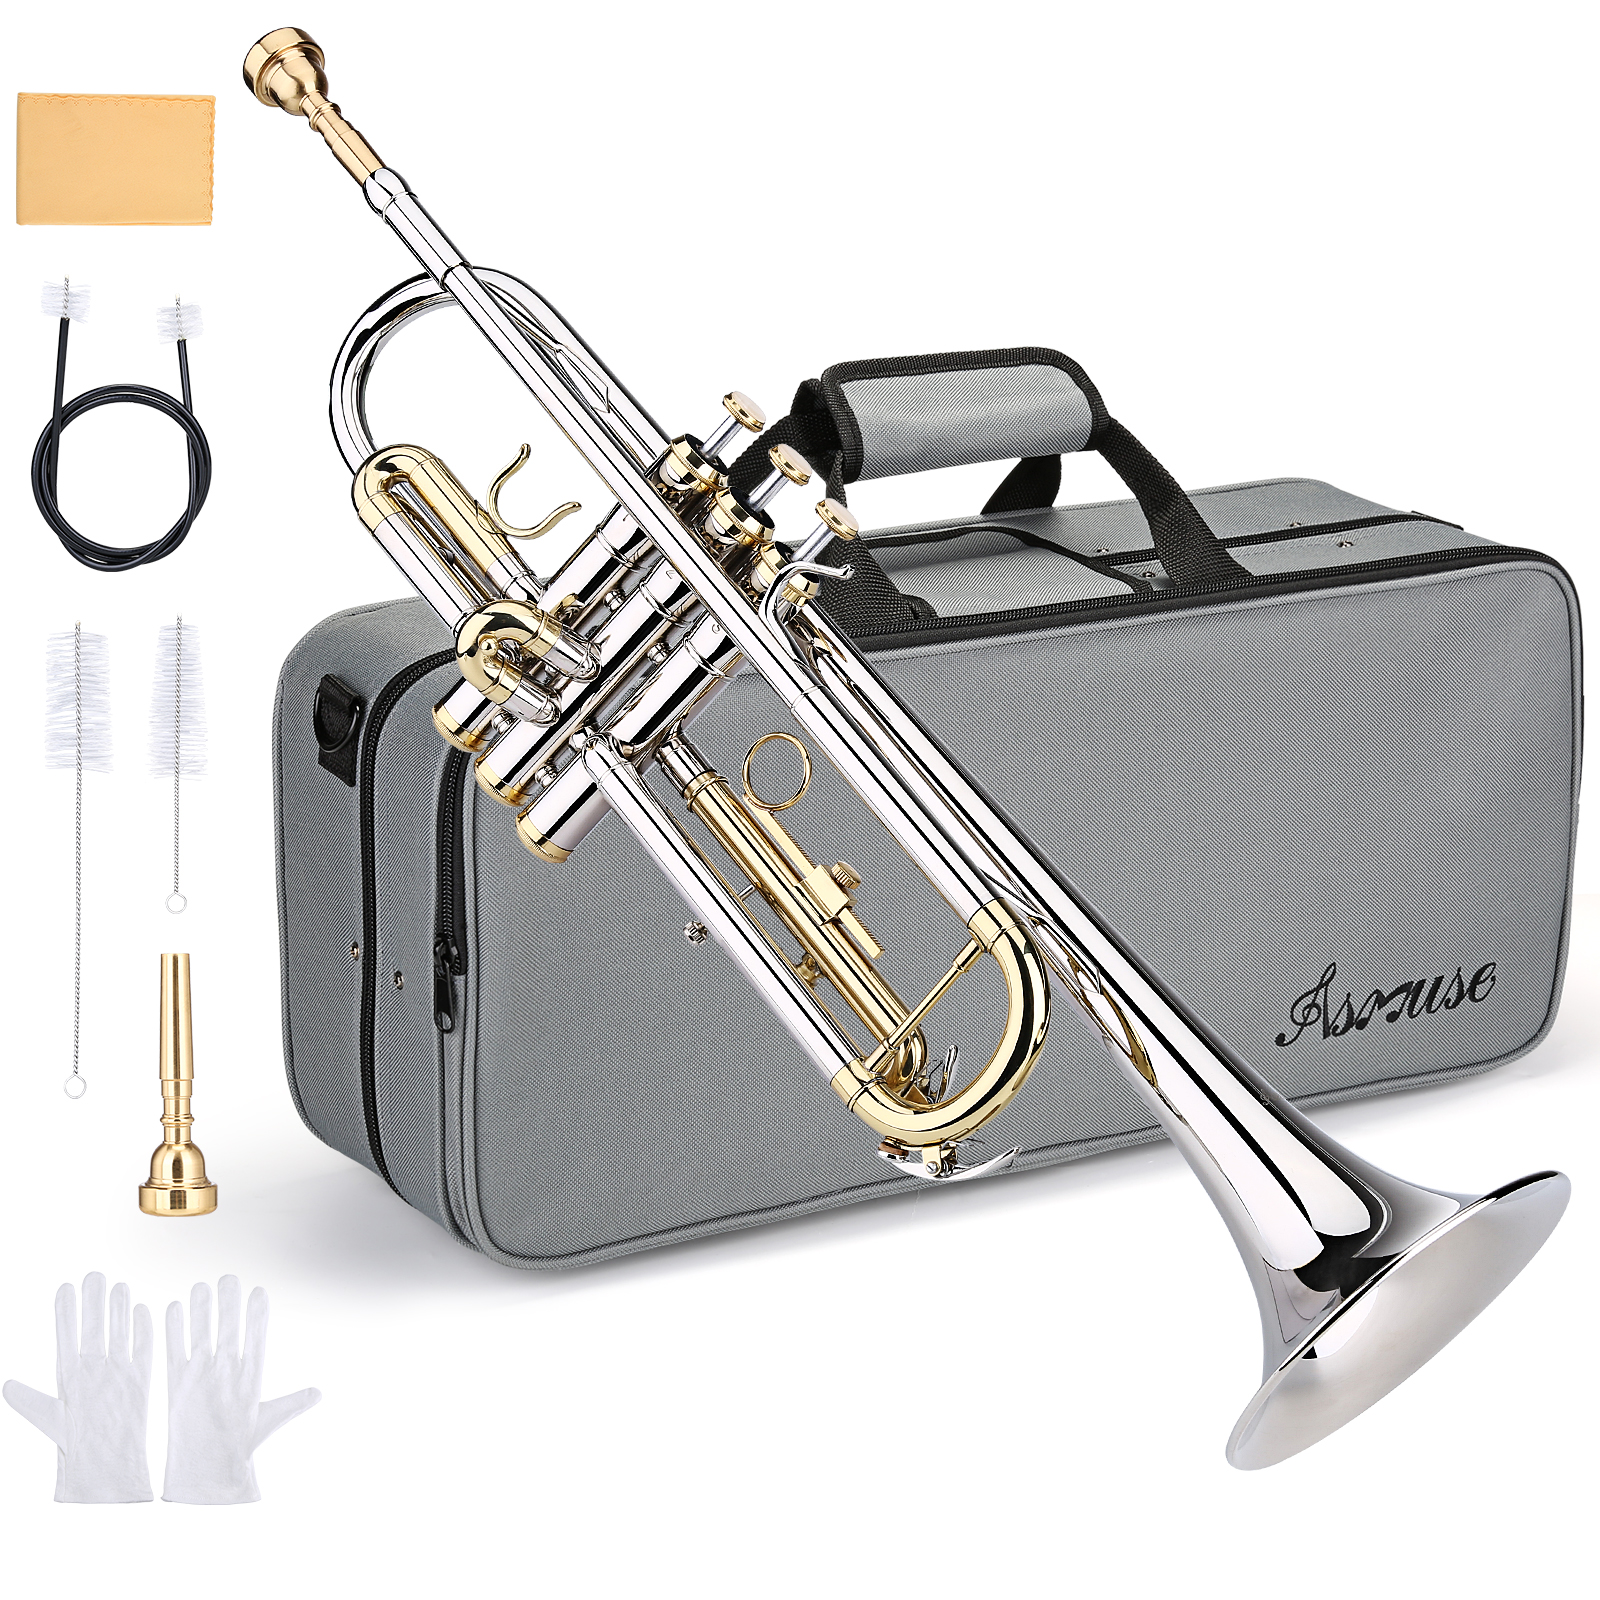 Color:Silver:BB TRUMPET- STUDENT BAND TRUMPETS BRASS INSTRUMENT WITH HARD CASE FOR BEGINNER